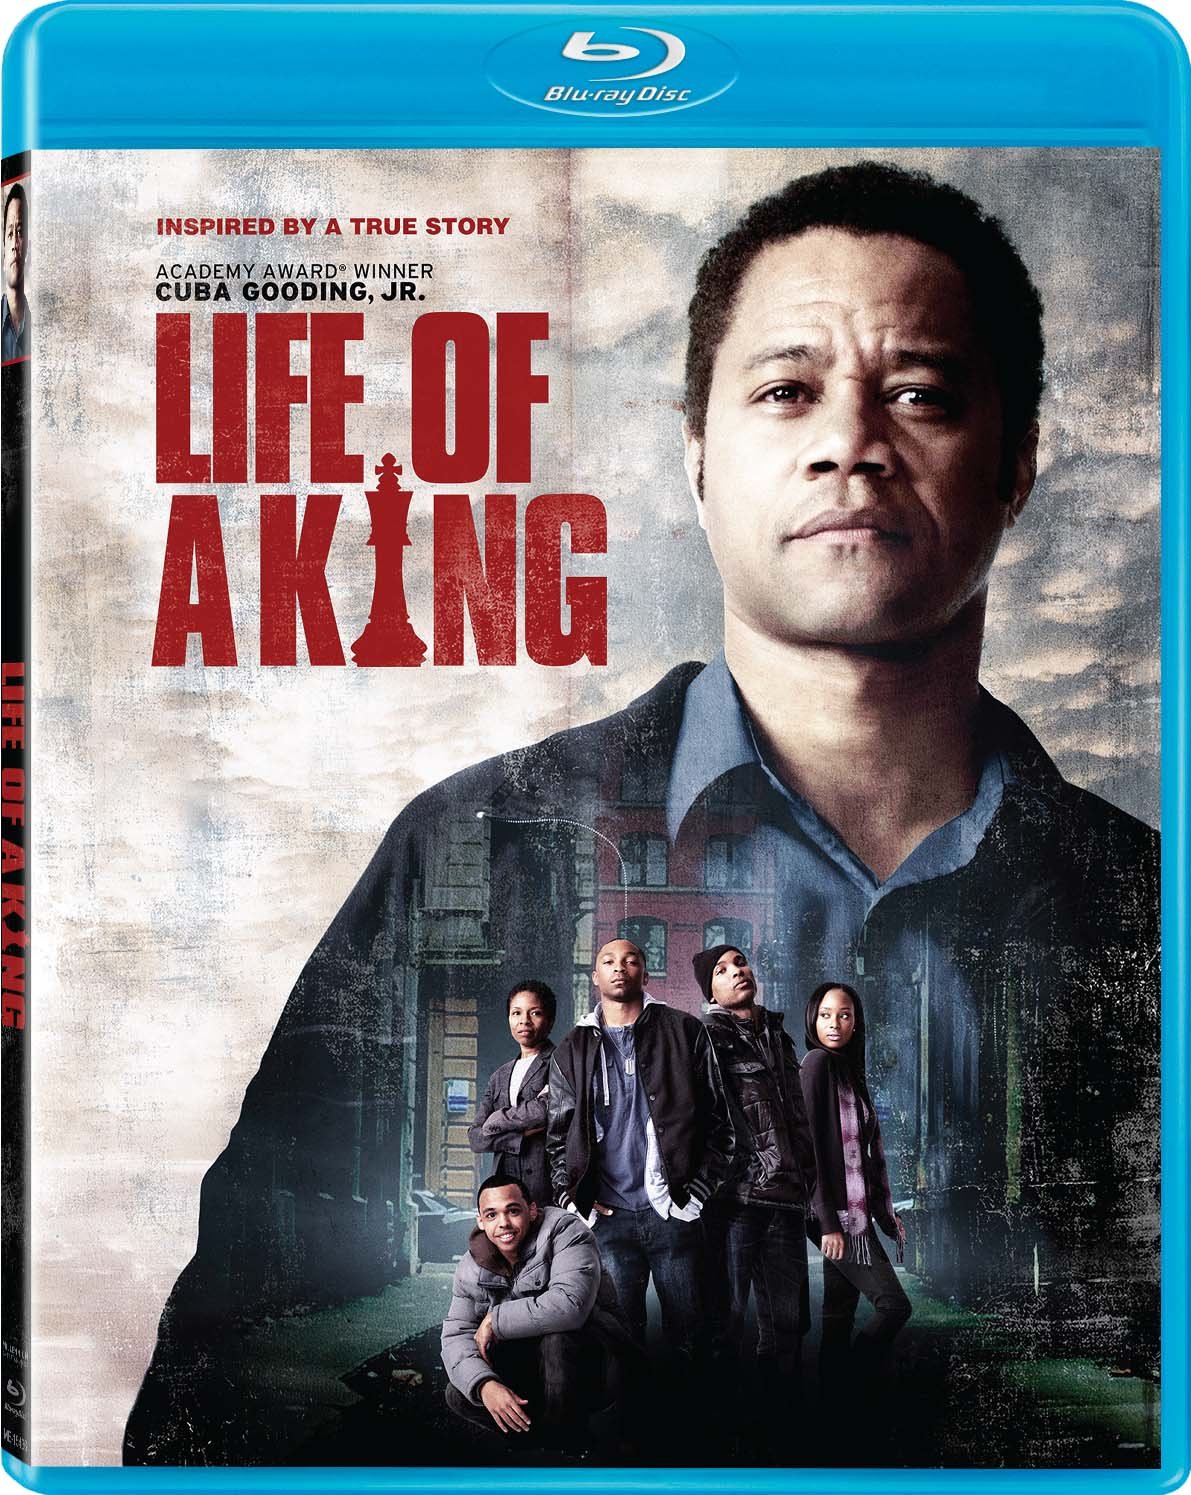 Watch Life of a King